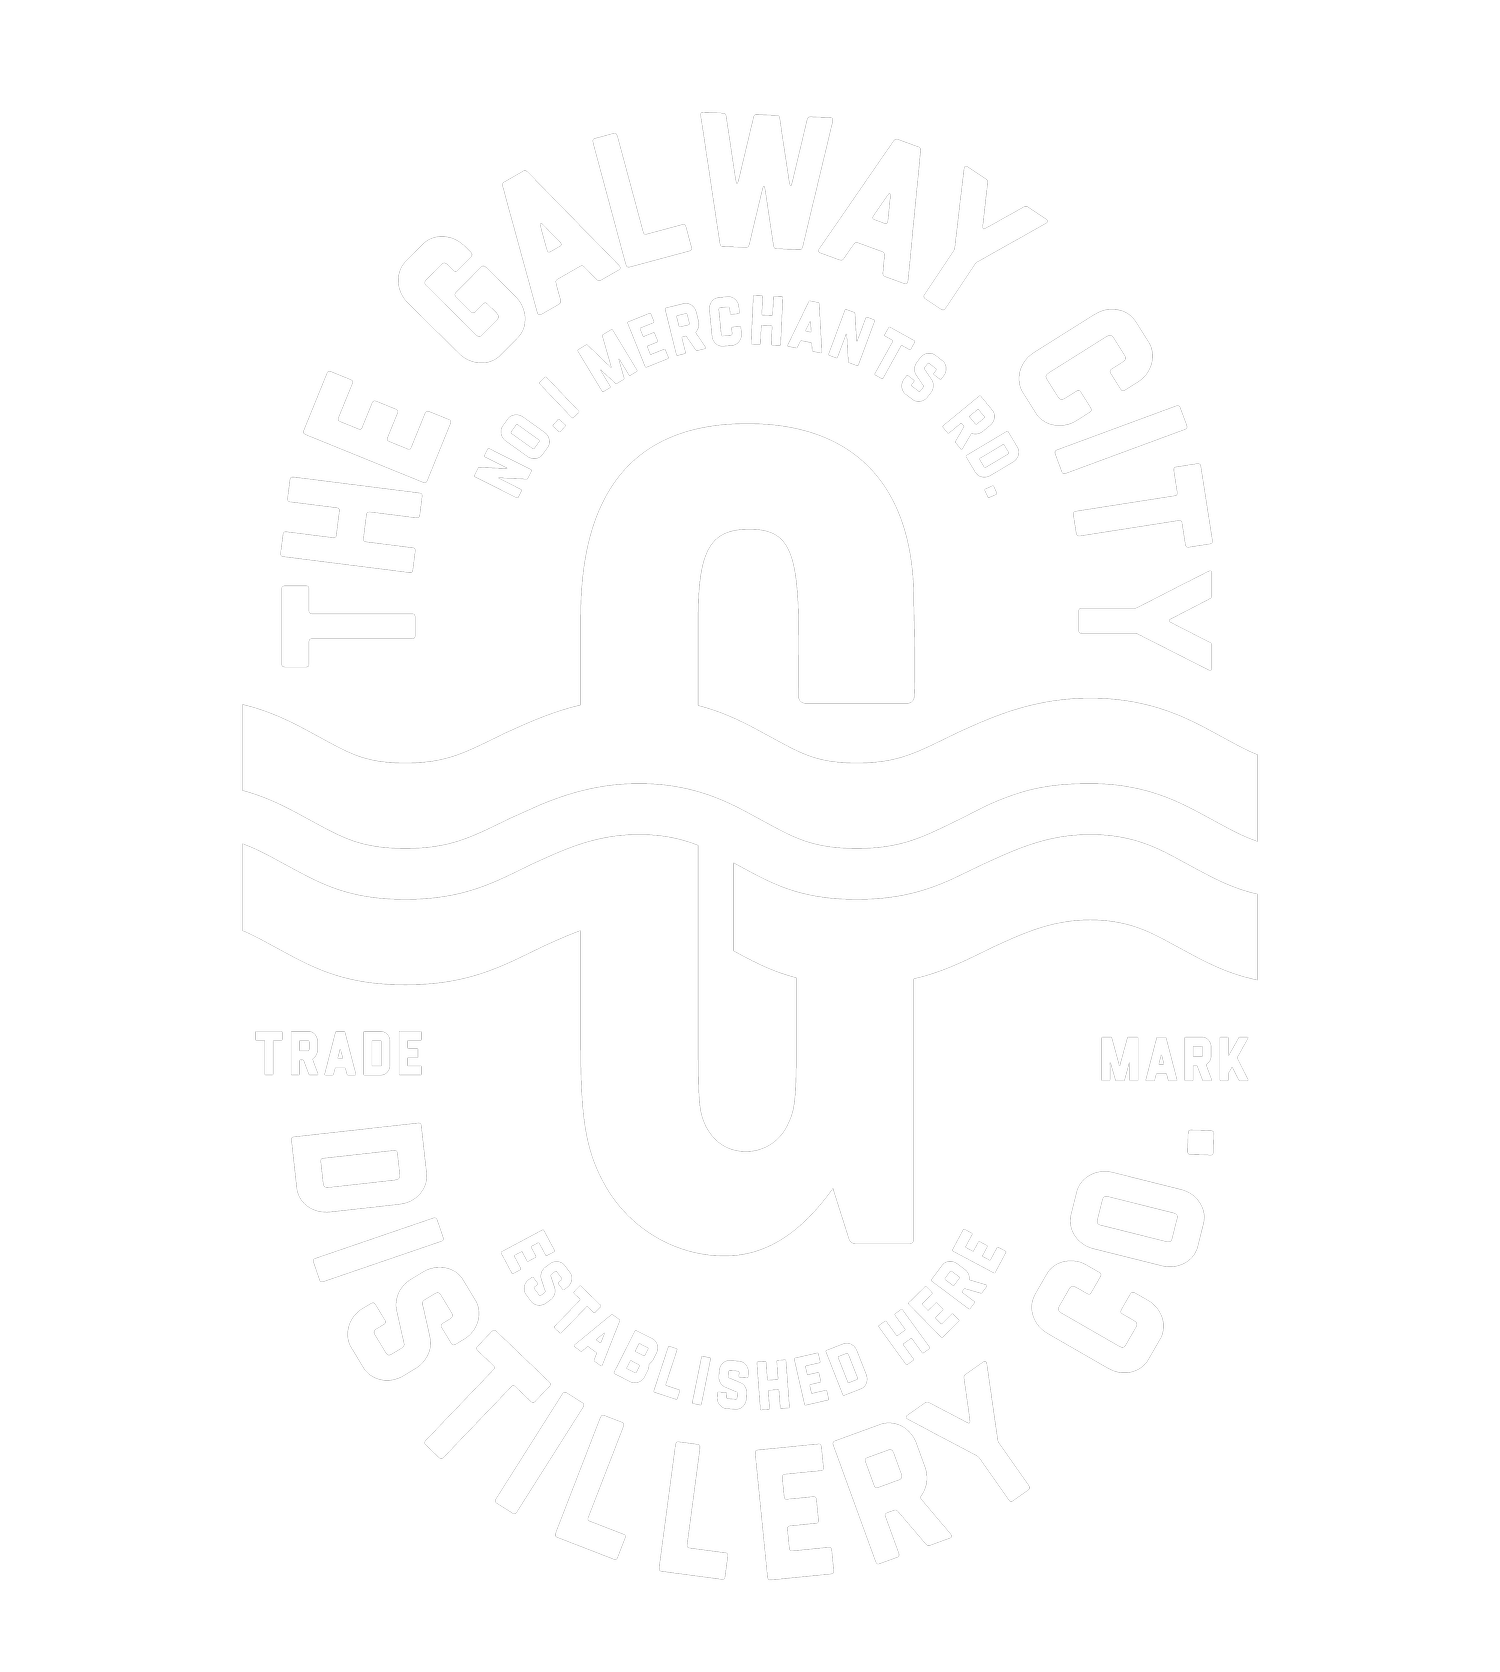 Galway City Distillery Co